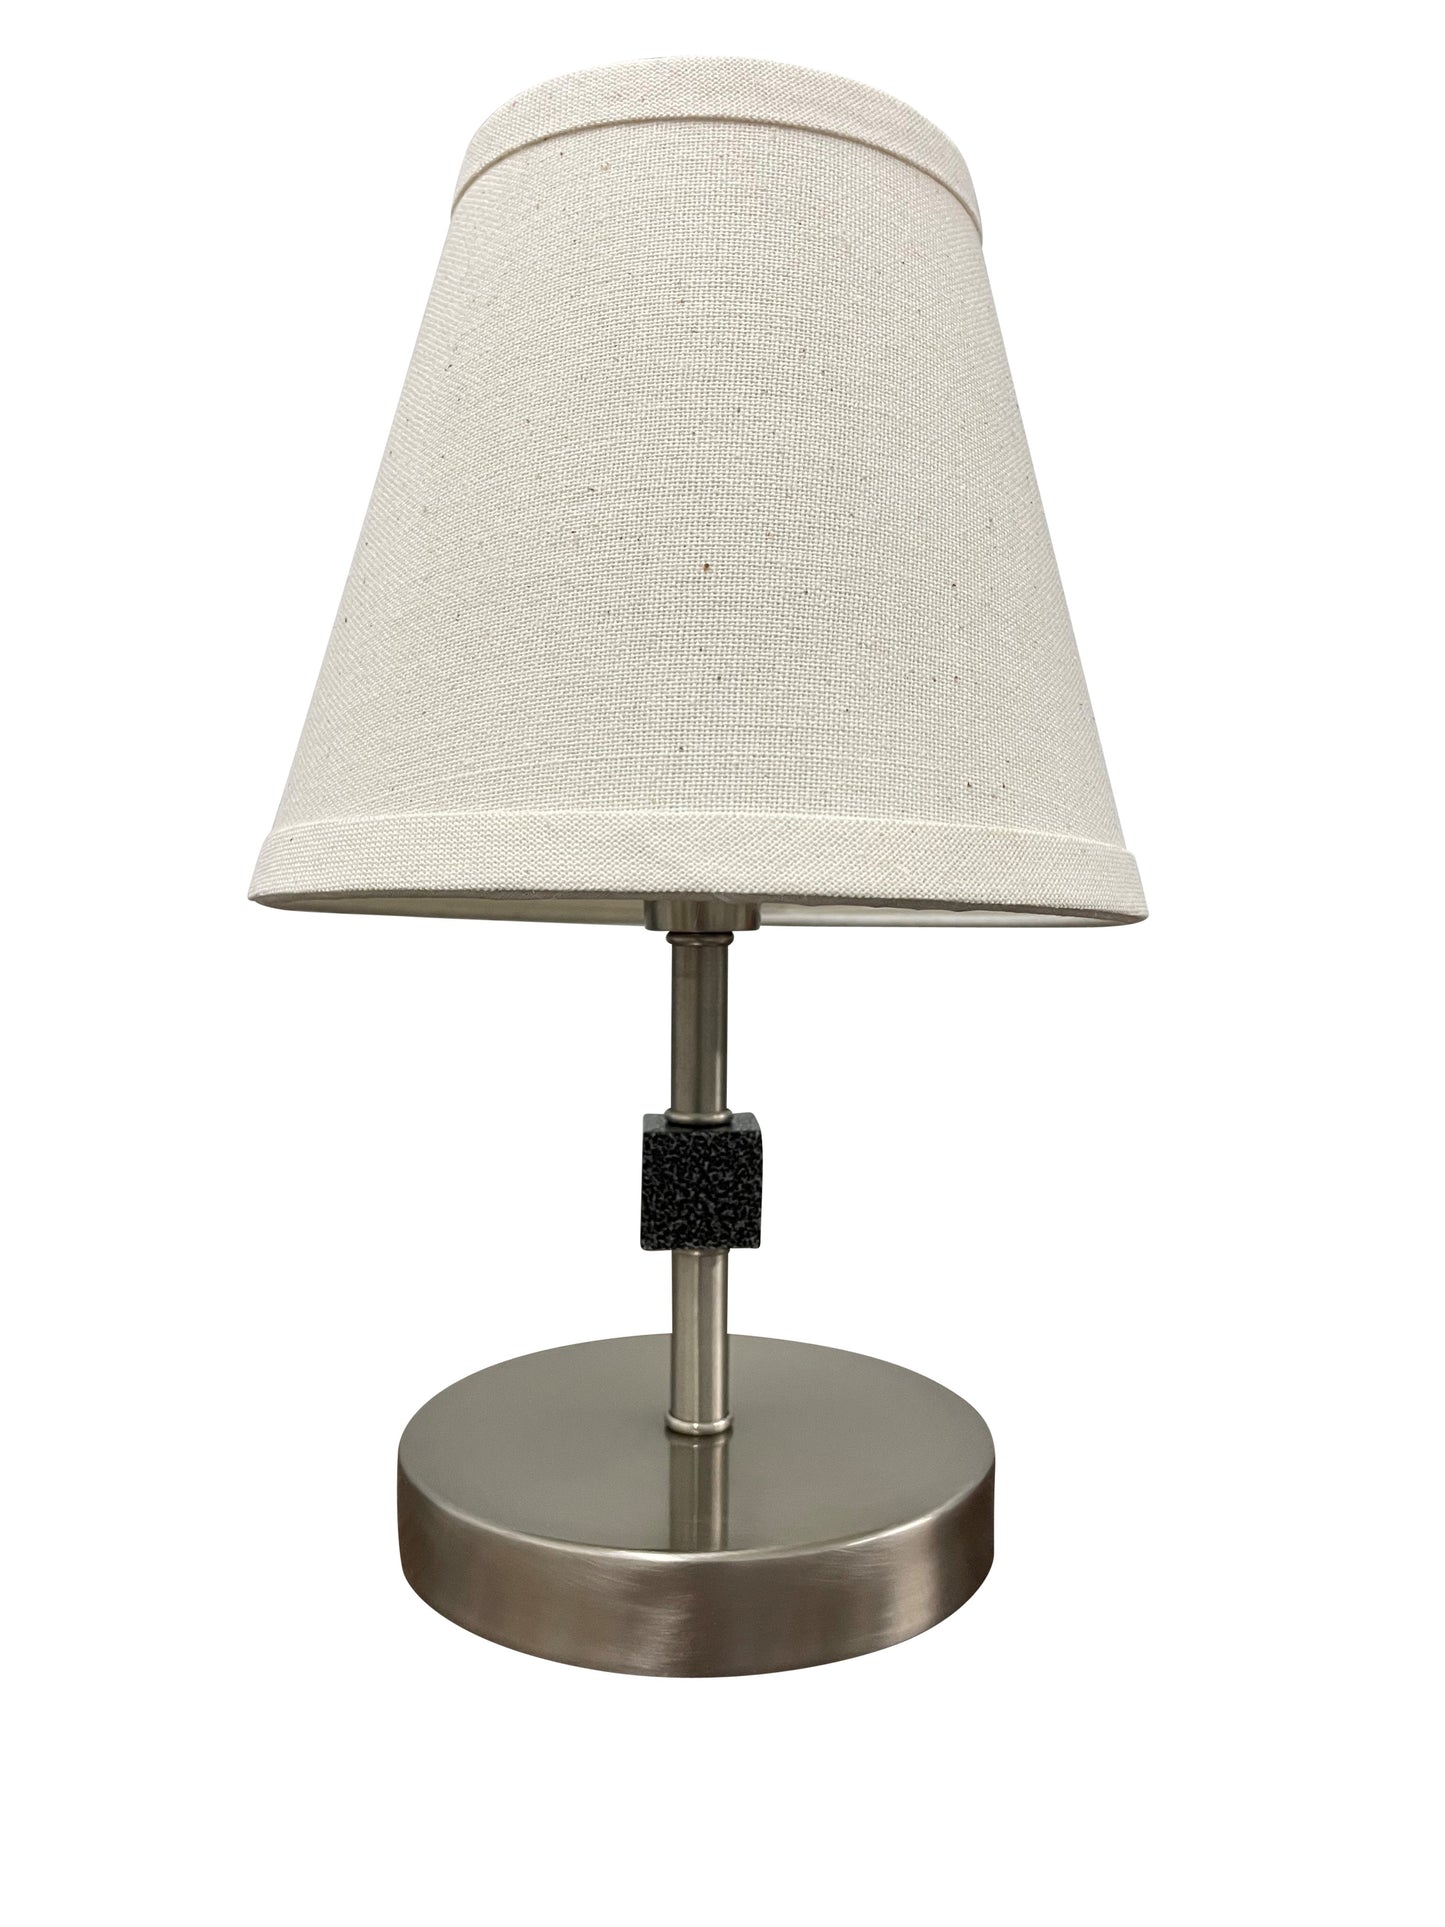 Bryson Mini Satin Nickel Supreme Silver Accent Lamp by House of Troy